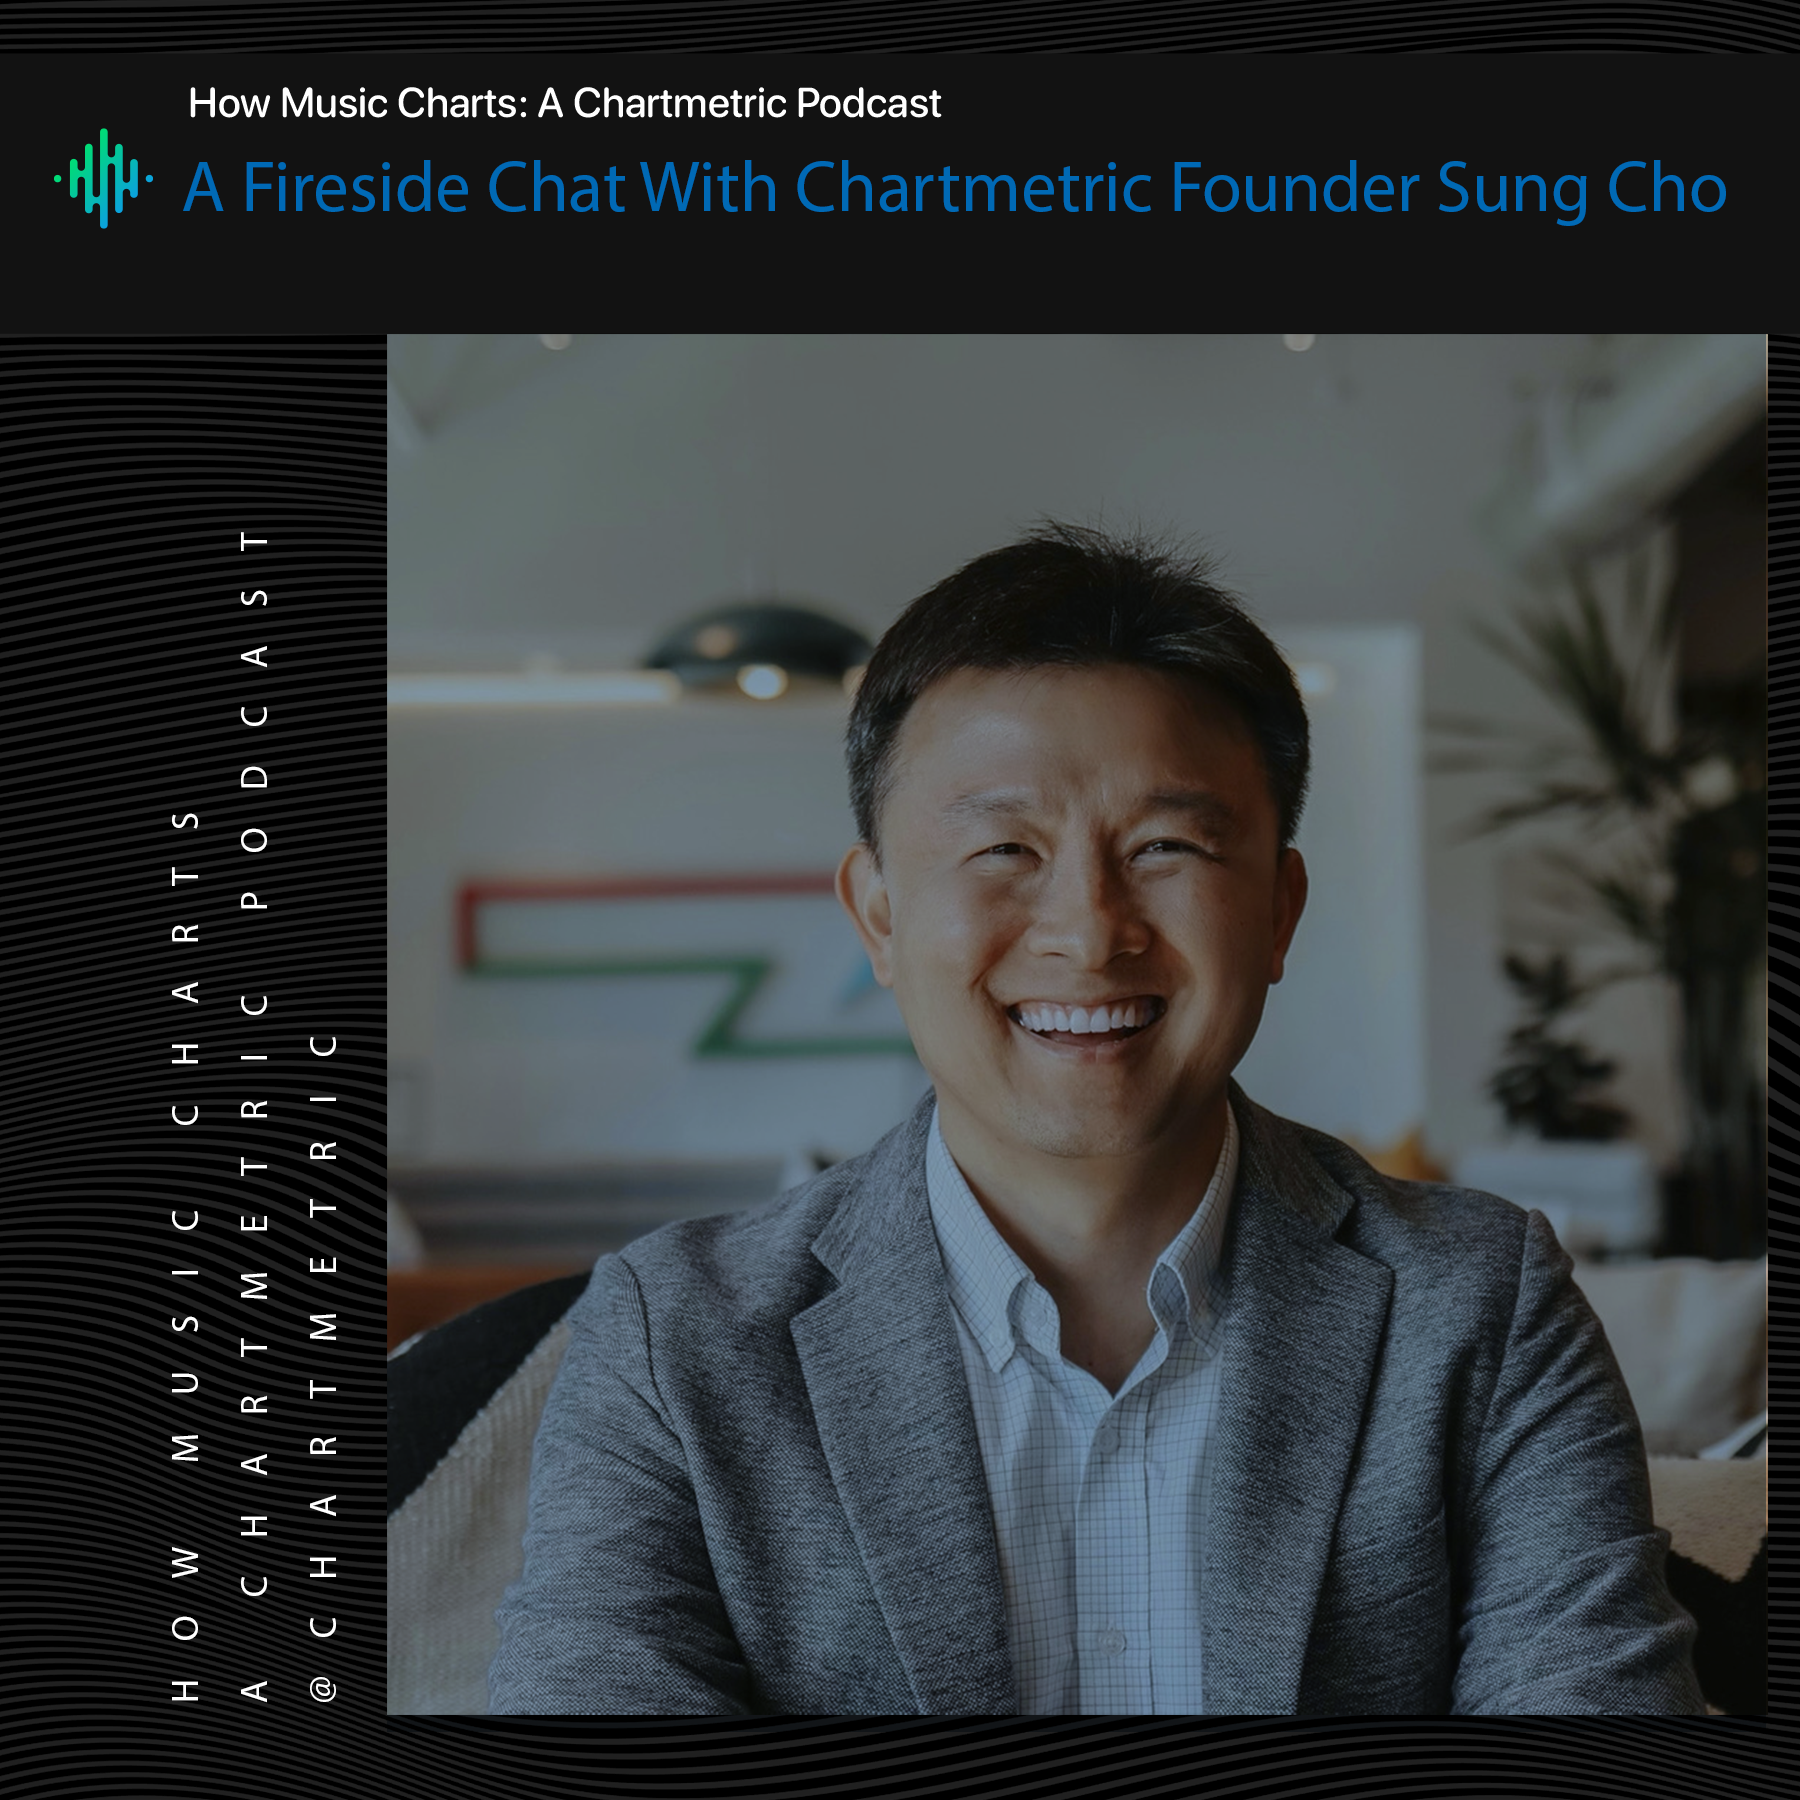 A Fireside Chat With Chartmetric Founder Sung Cho